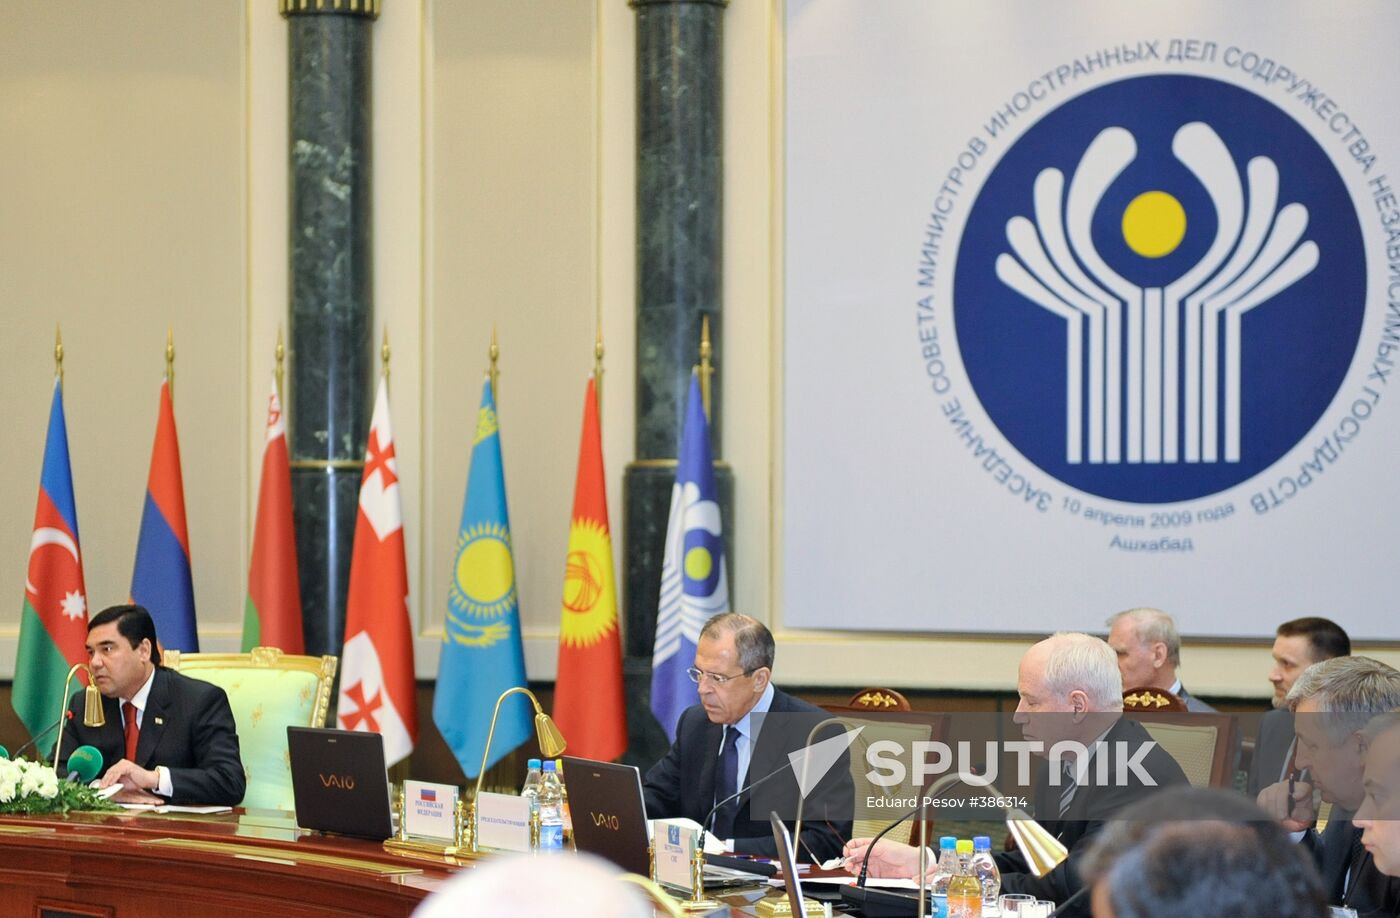 Council of CIS Foreign Ministers in Ashgabat